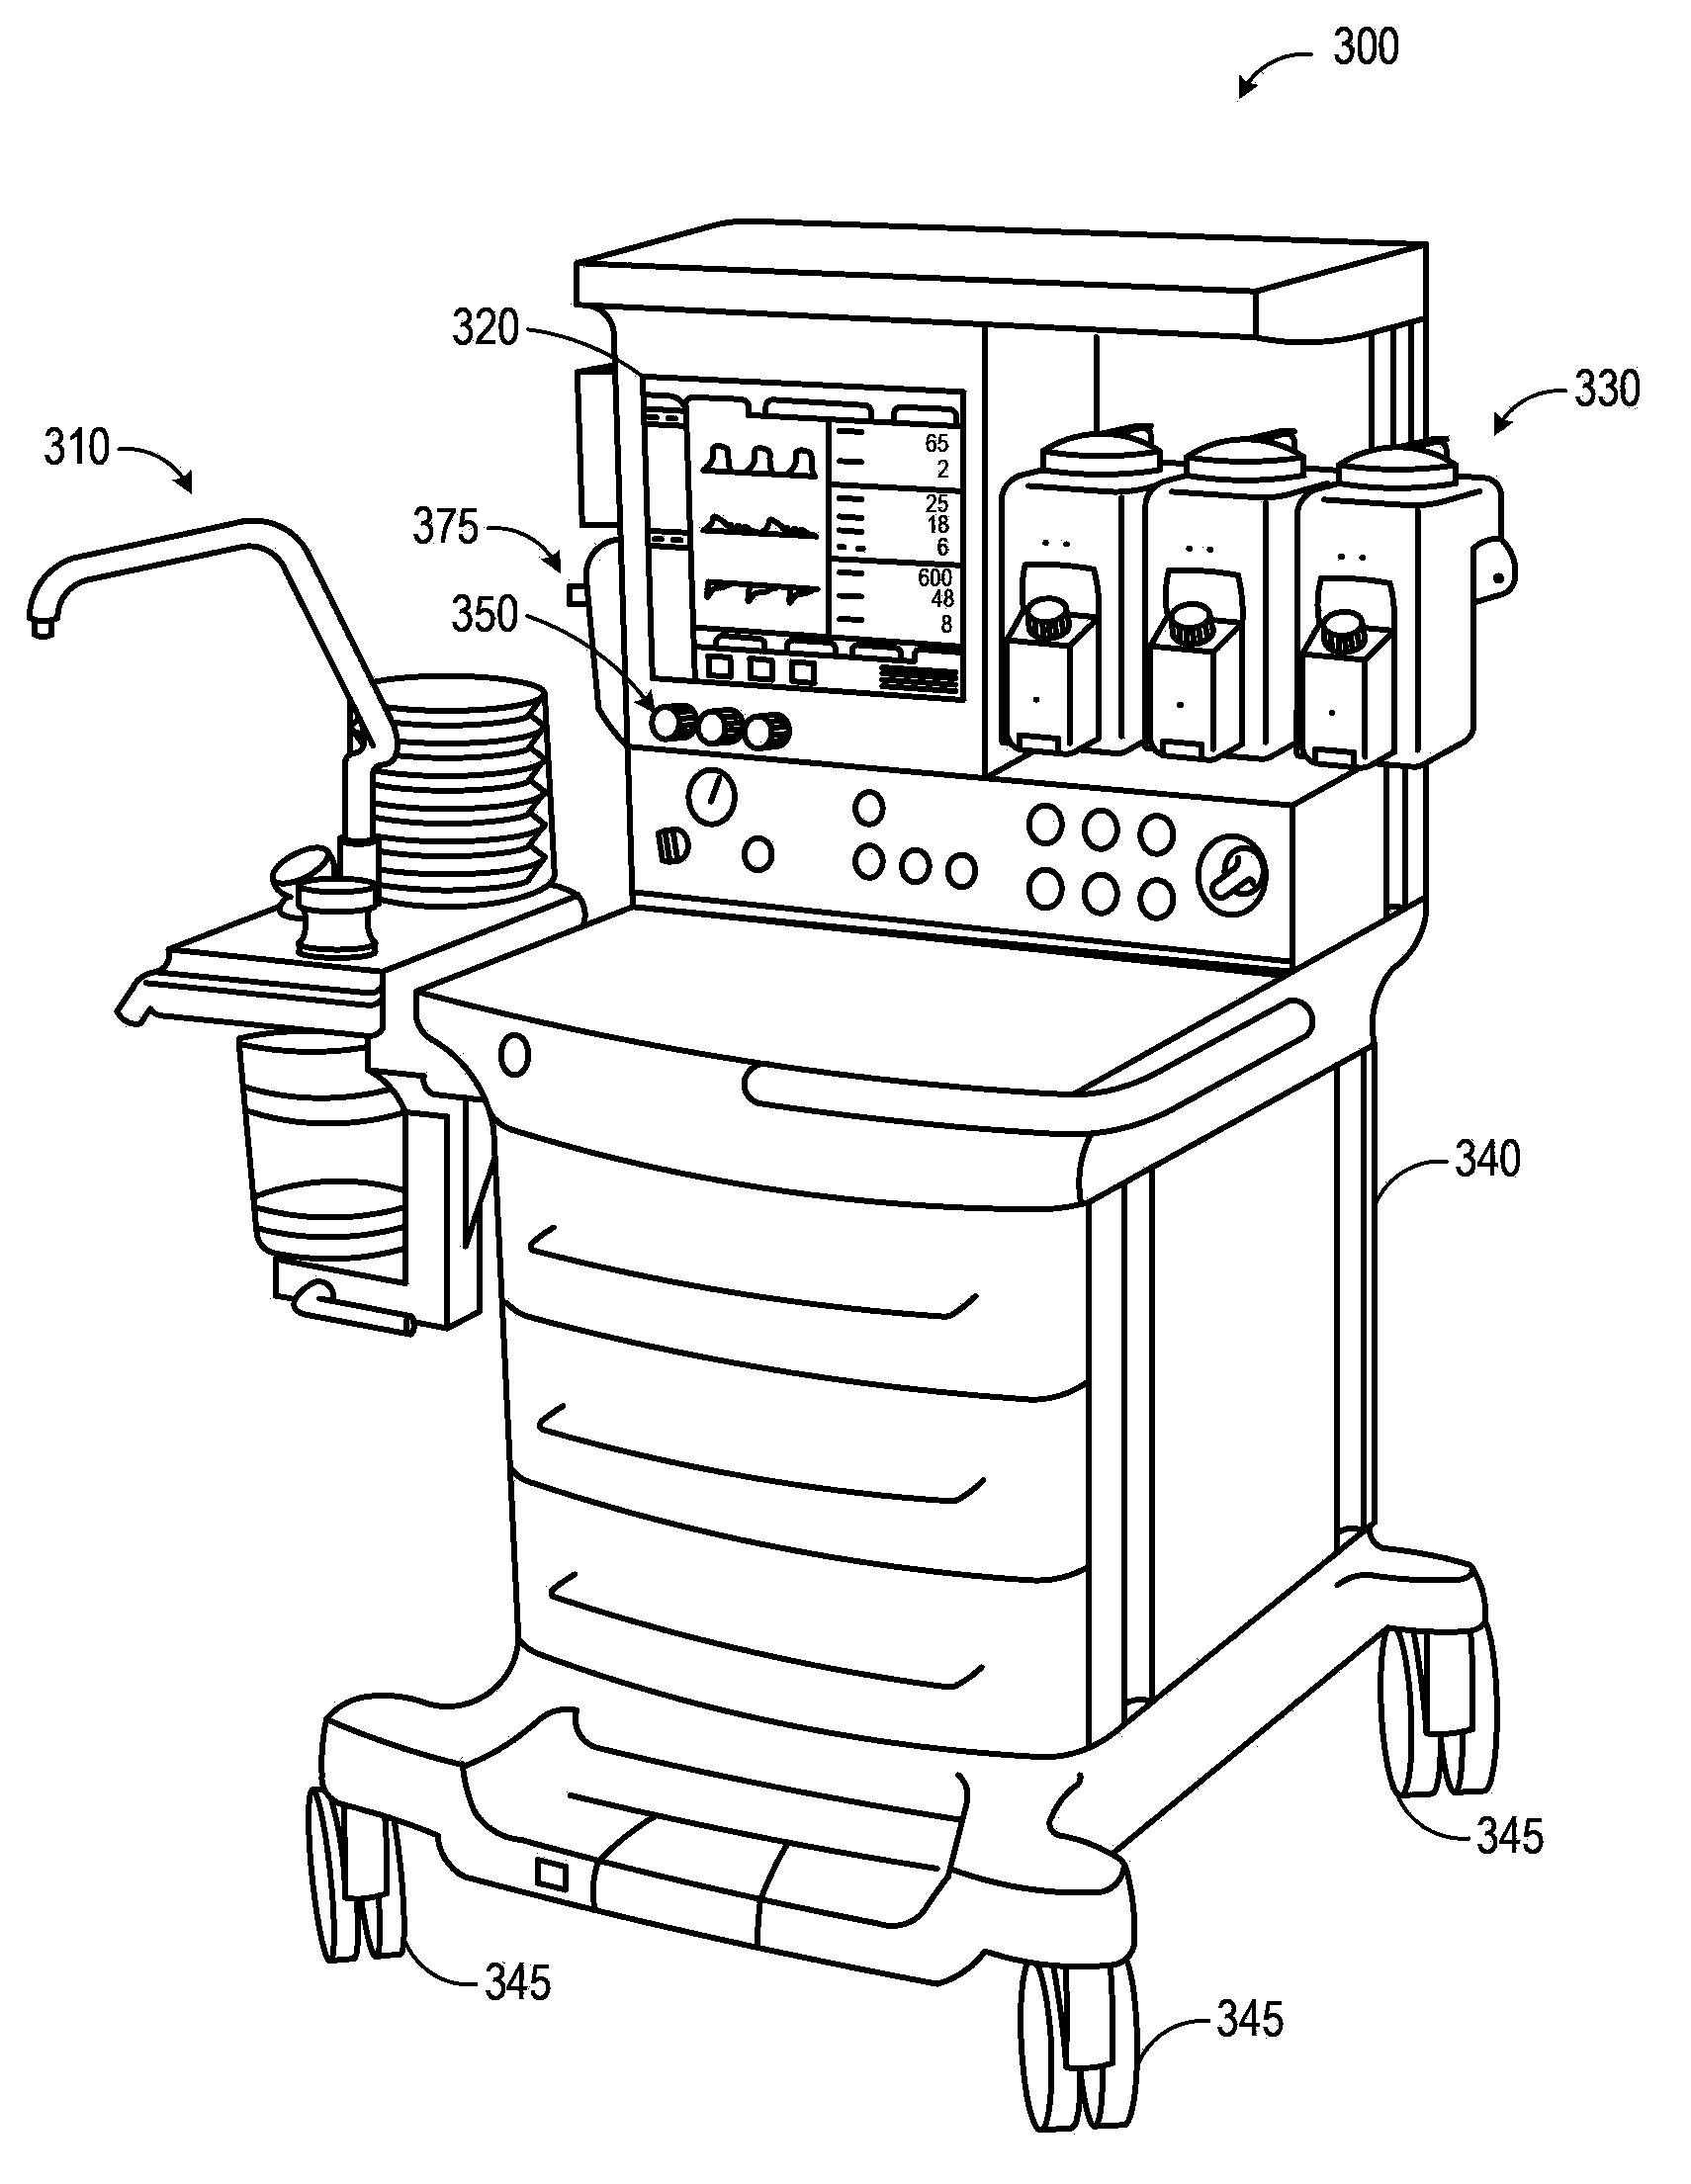 Fluid electronic control system and anaesthesia machine